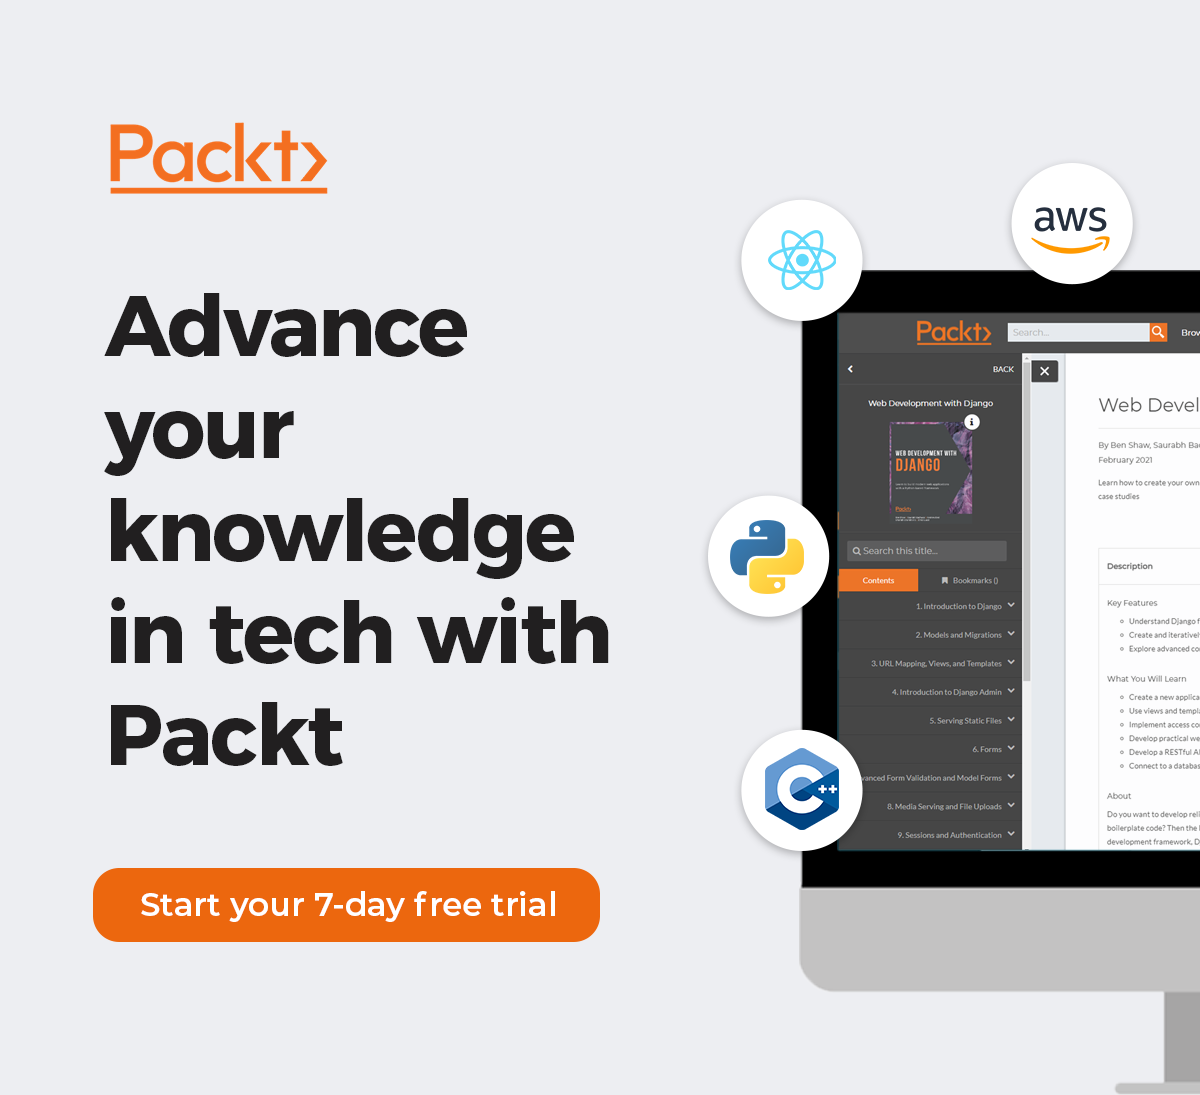 Advance your knowledge in tech with Packt